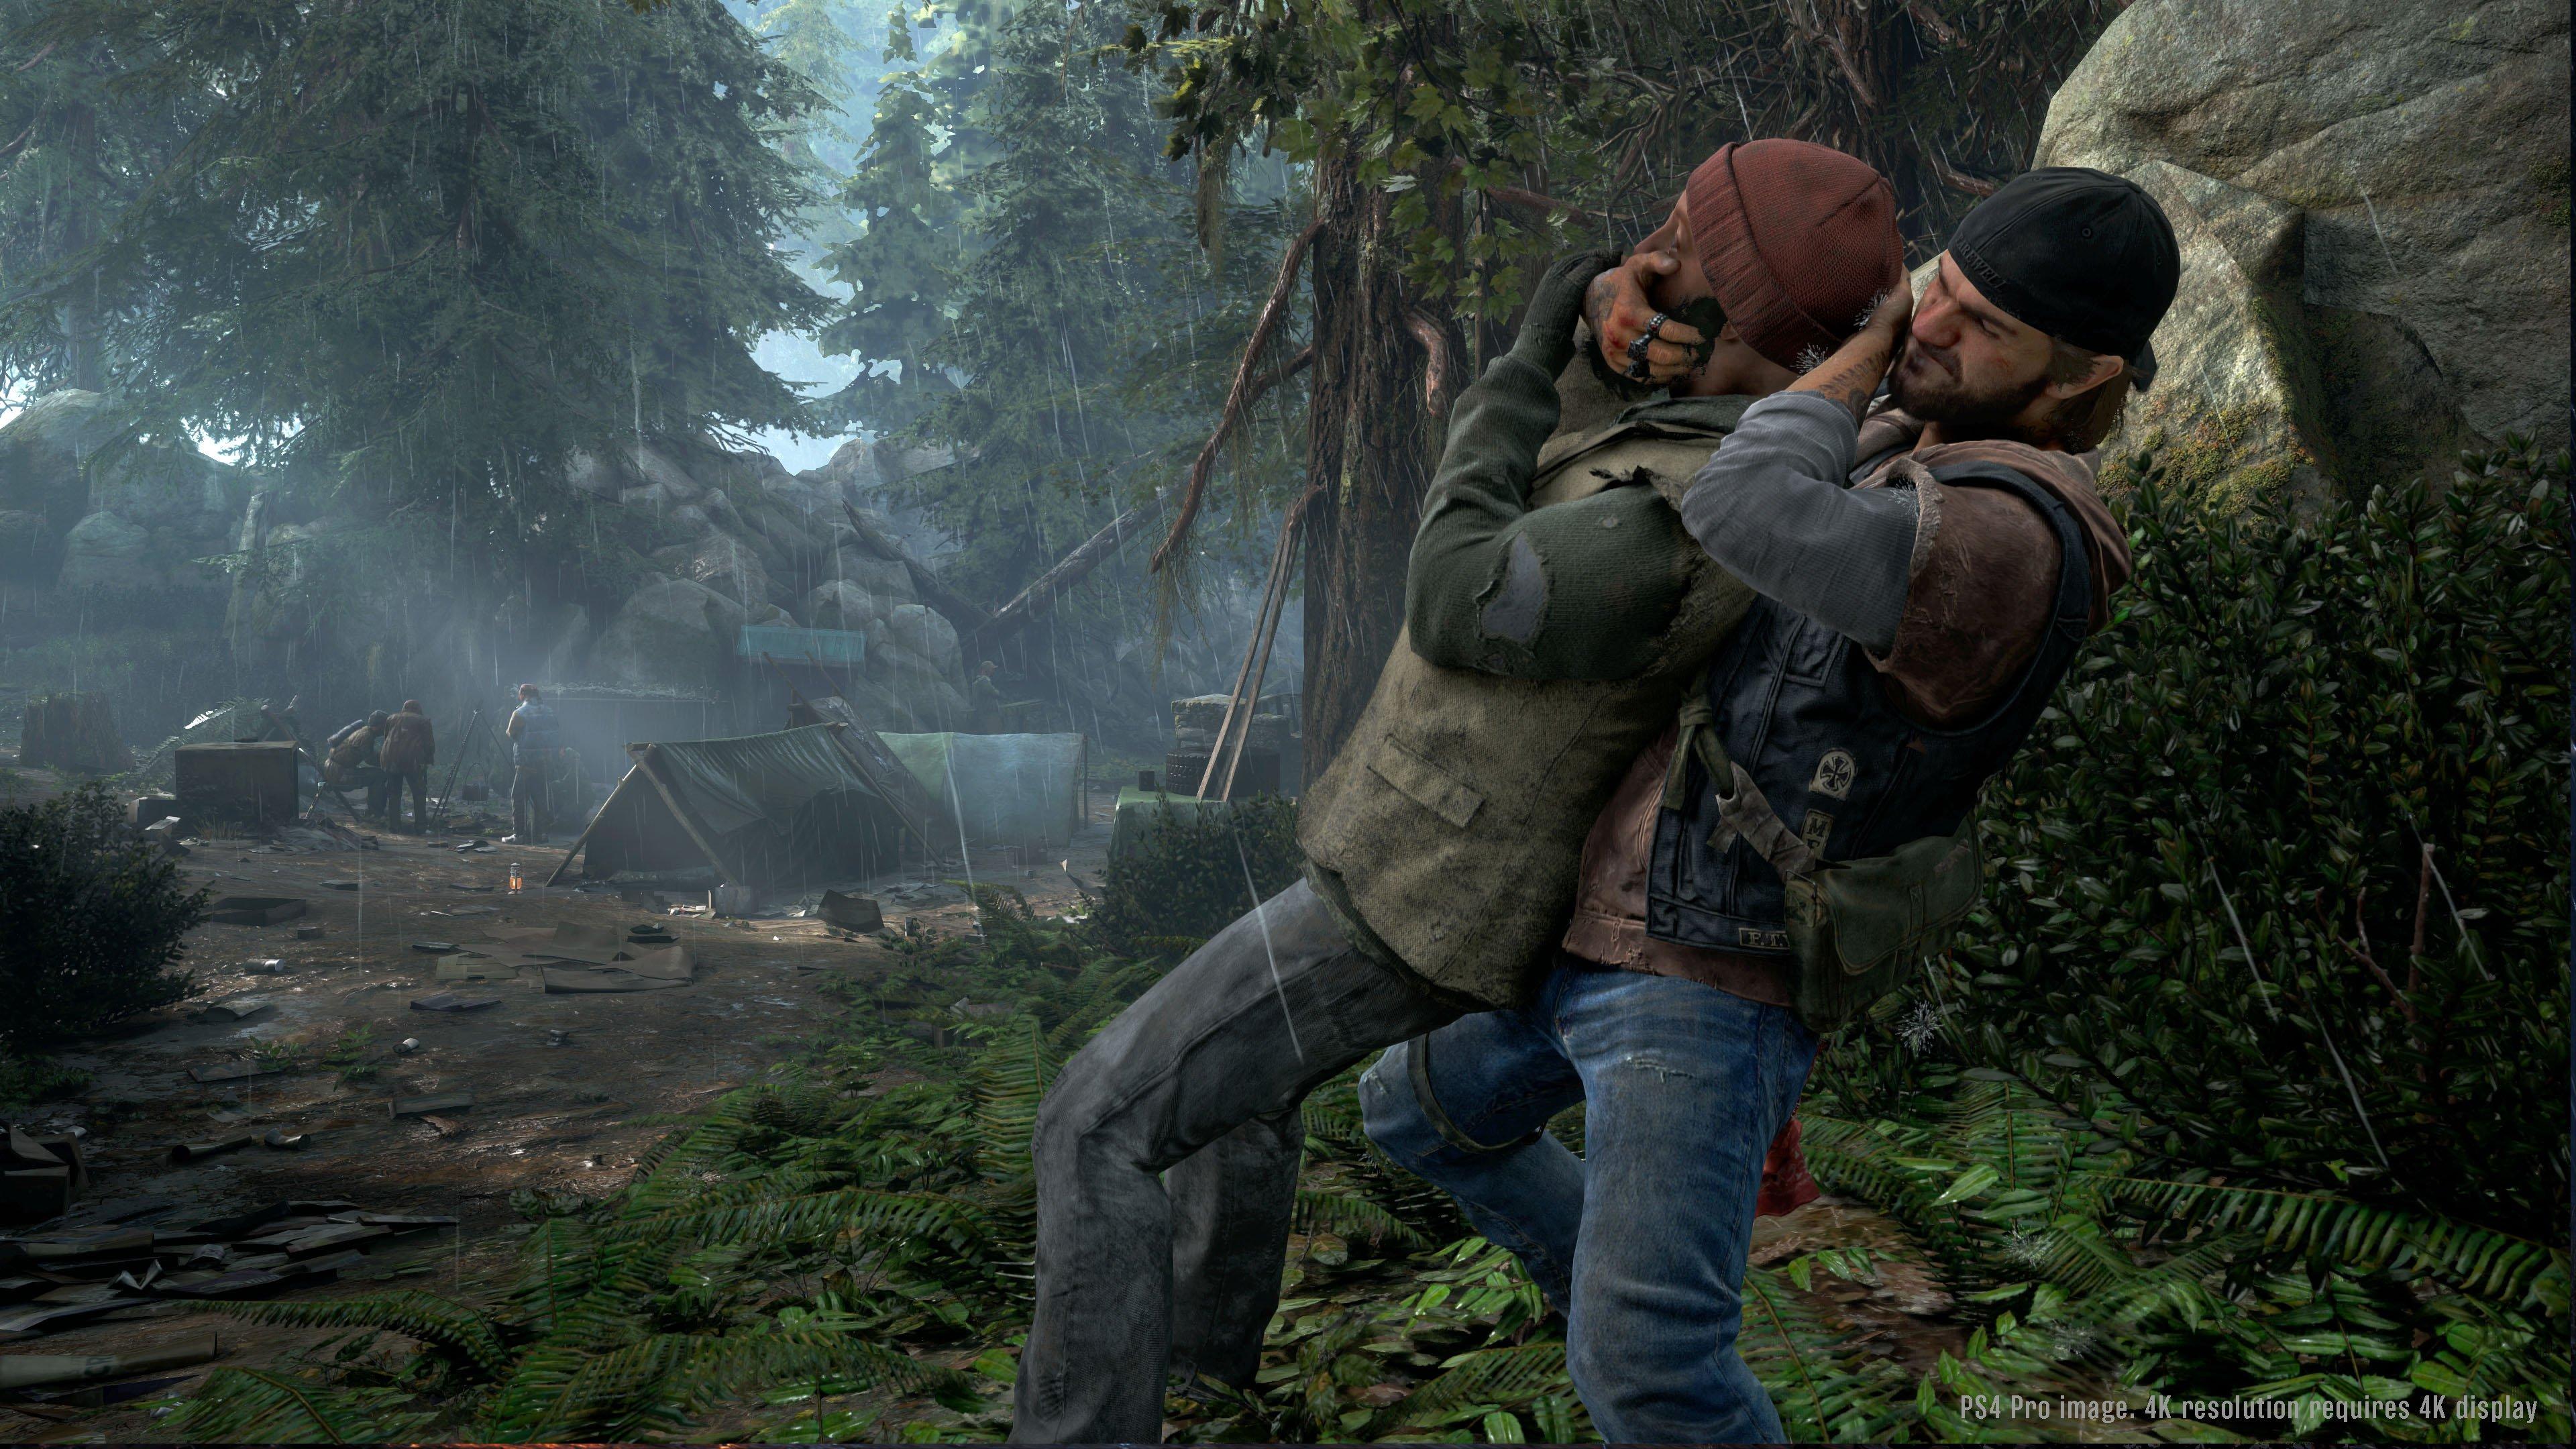 Game review: Days Gone is the PS4's most contentious exclusive